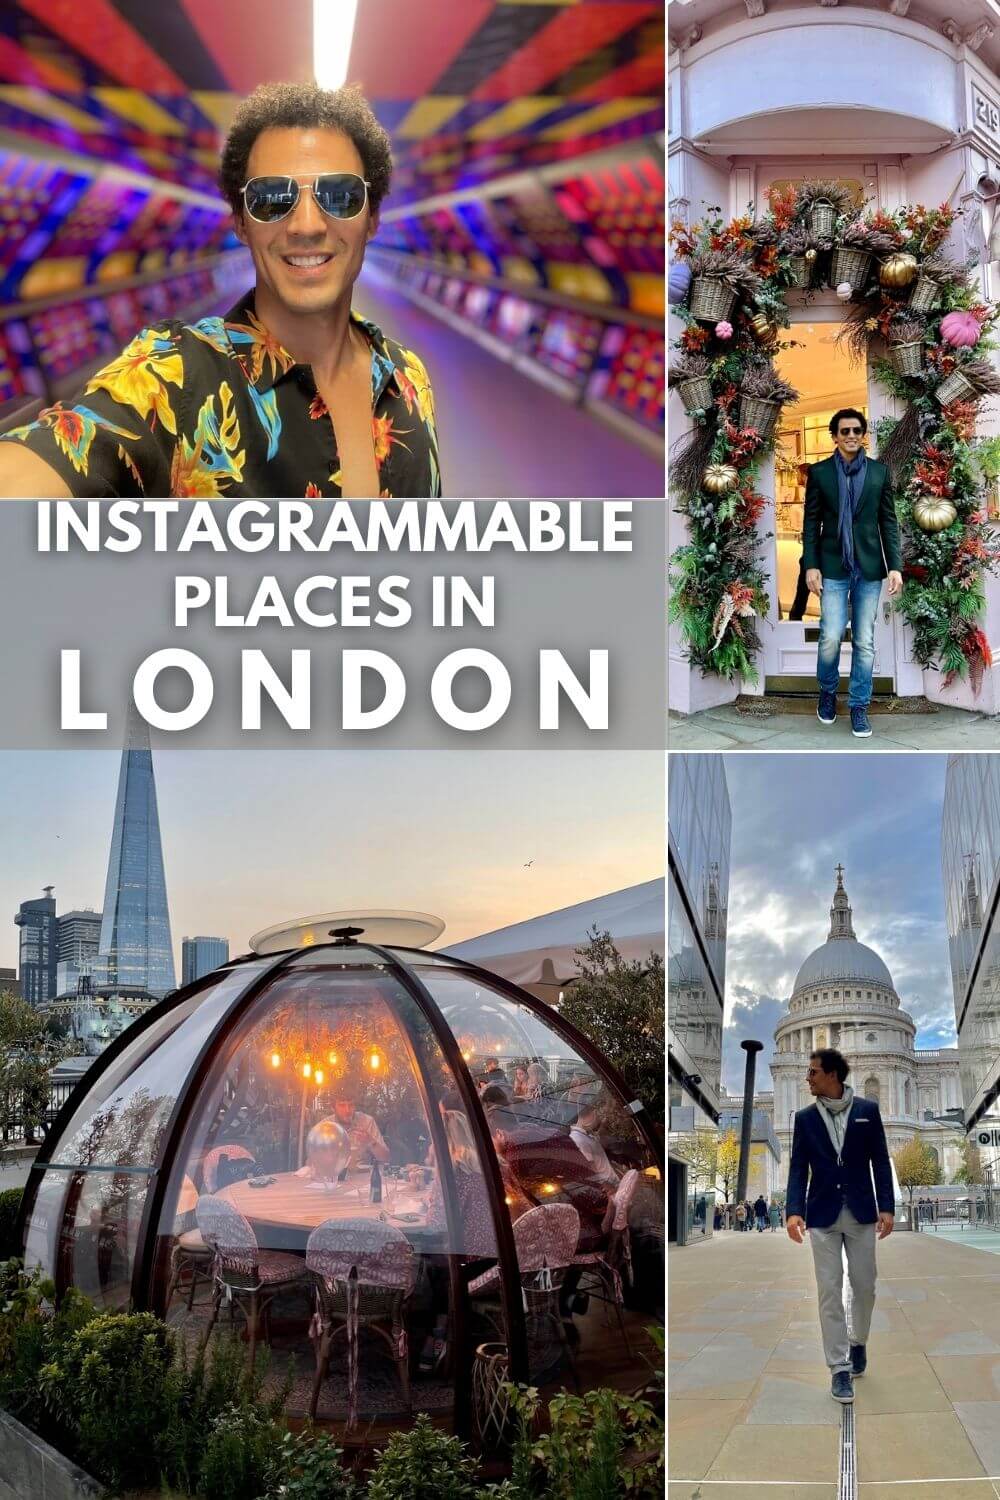 A man wearing sunglasses and a colourful shirt taking a selfie at Adam's Plaza Bridge in Canary Wharf; A man posing at Peggy Porschen, Chelsea, London; Coppa Club Tower Bridge; A man walking at One New Change with the Saint's Paul Cathedral as a backdrop